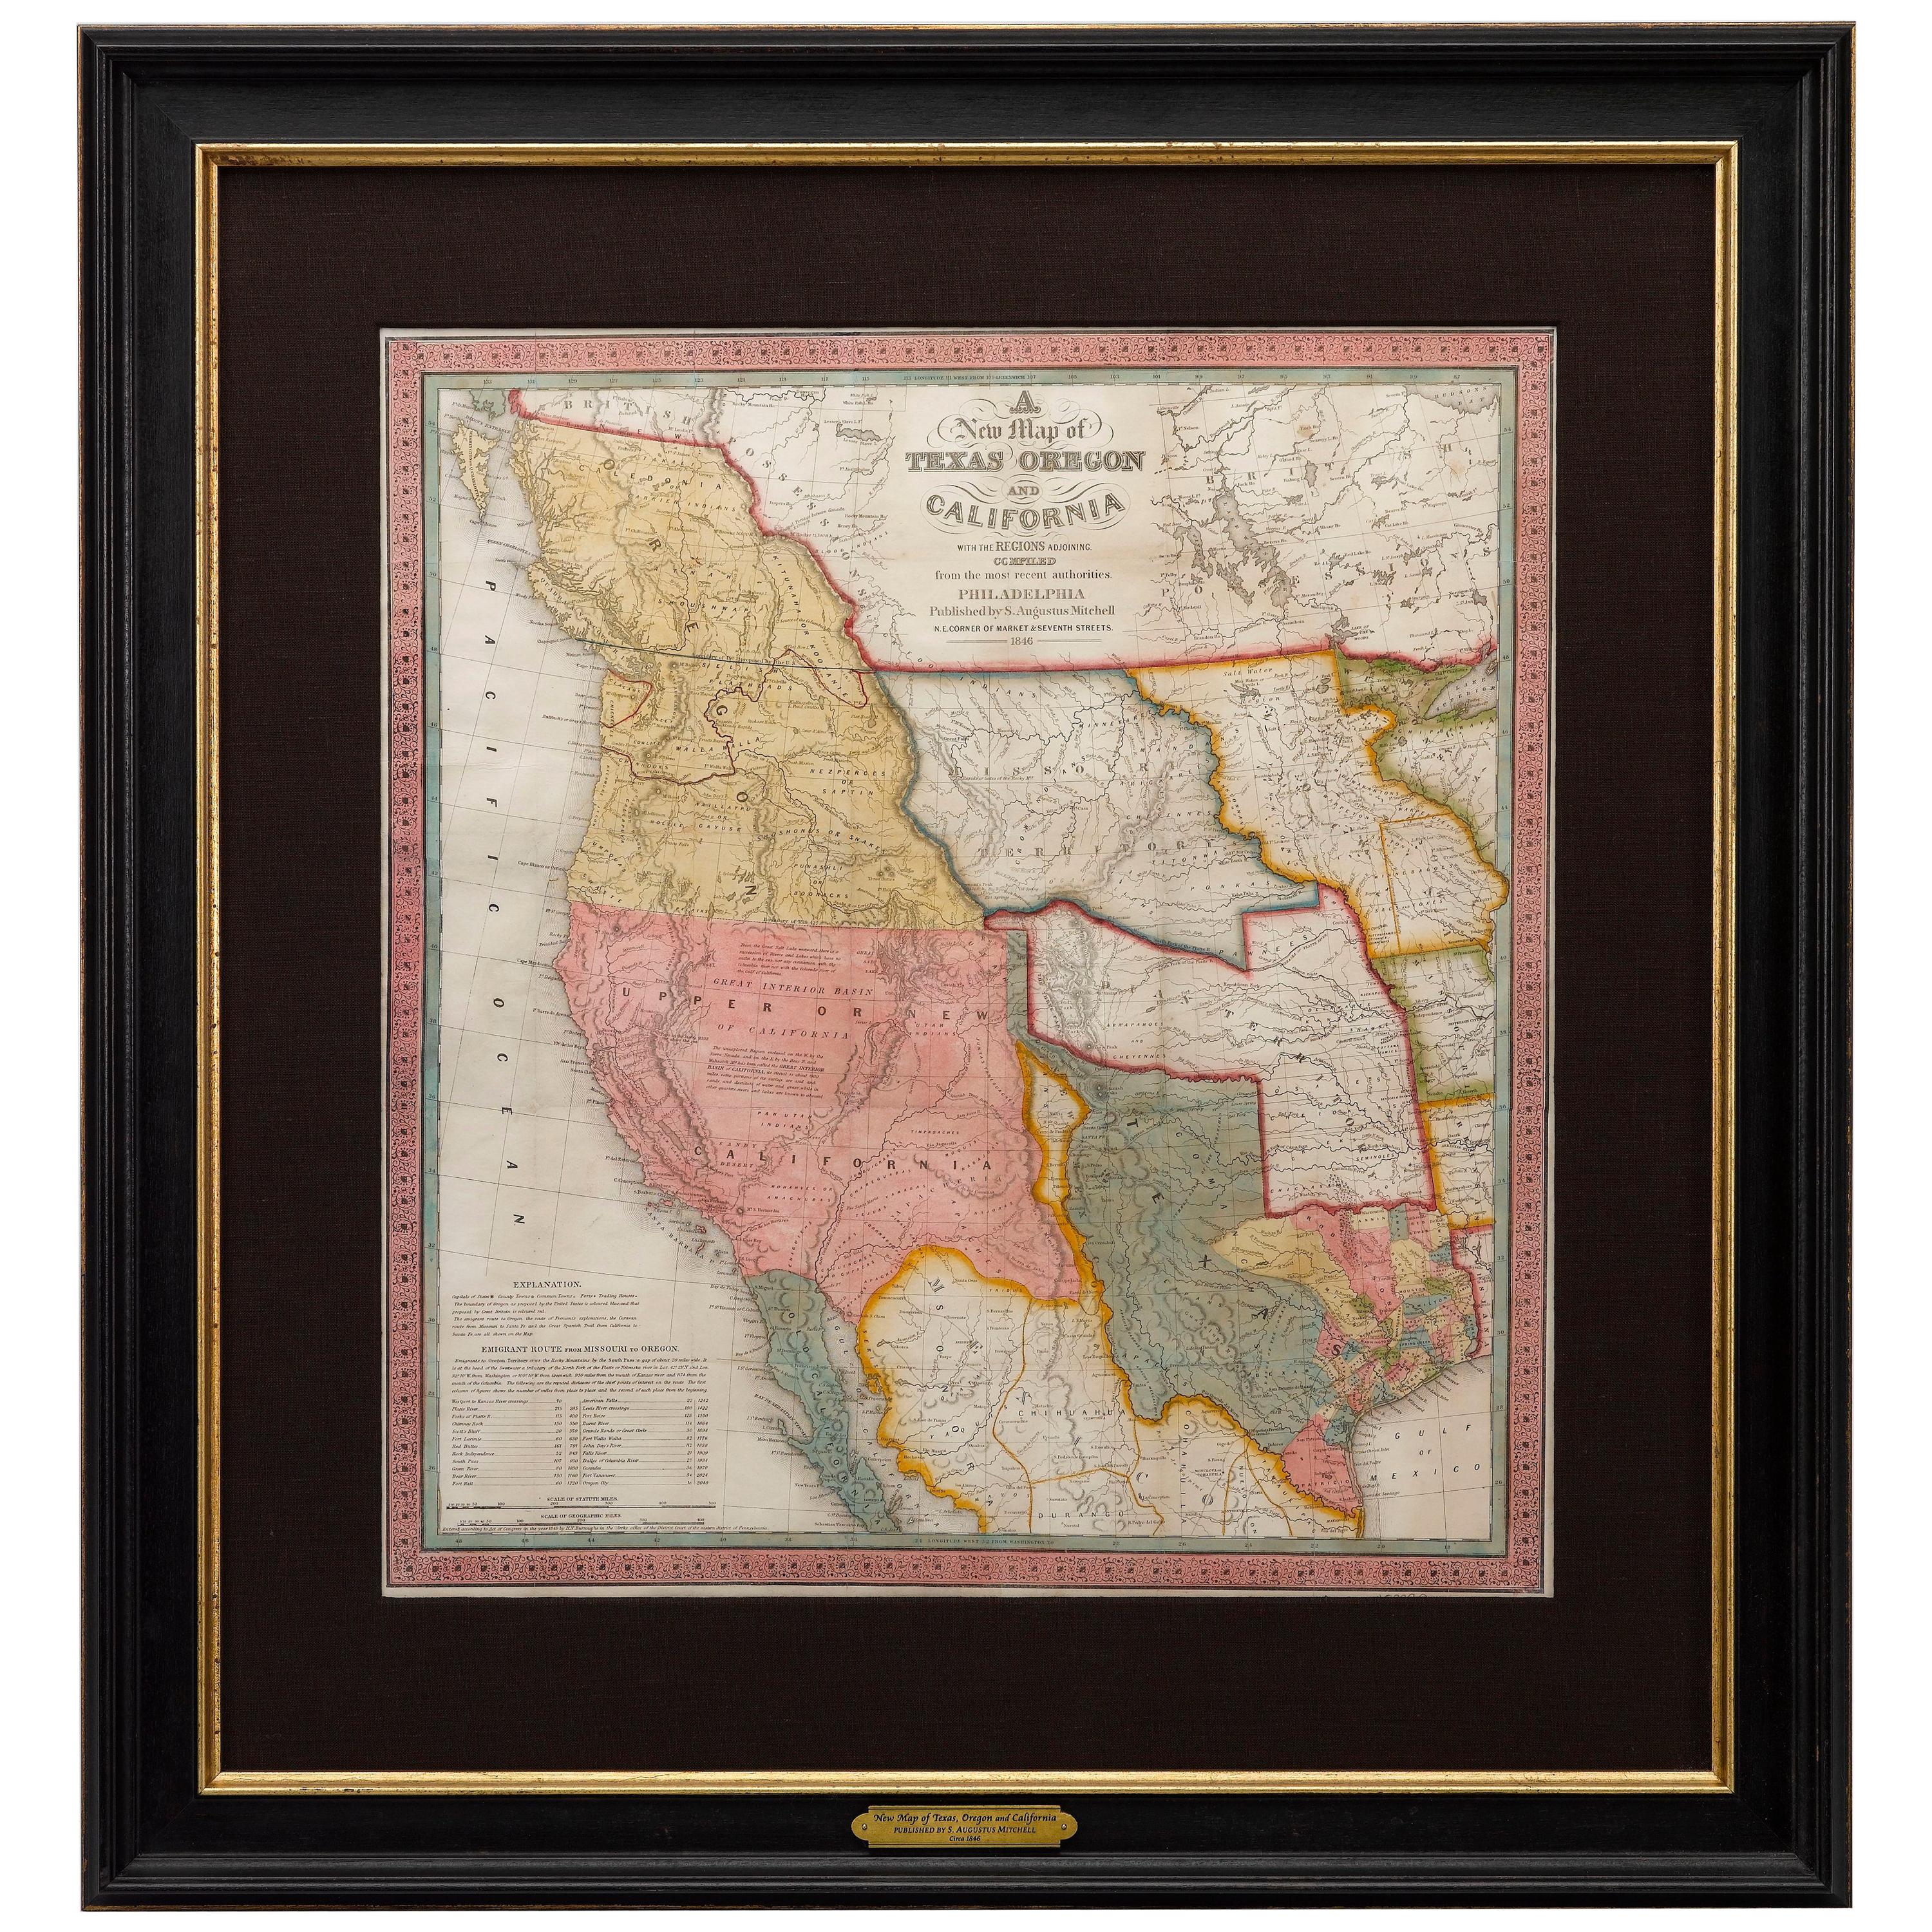 1846 Antique Map of Texas, Oregon, California, and Regions Adjoining by Mitchell